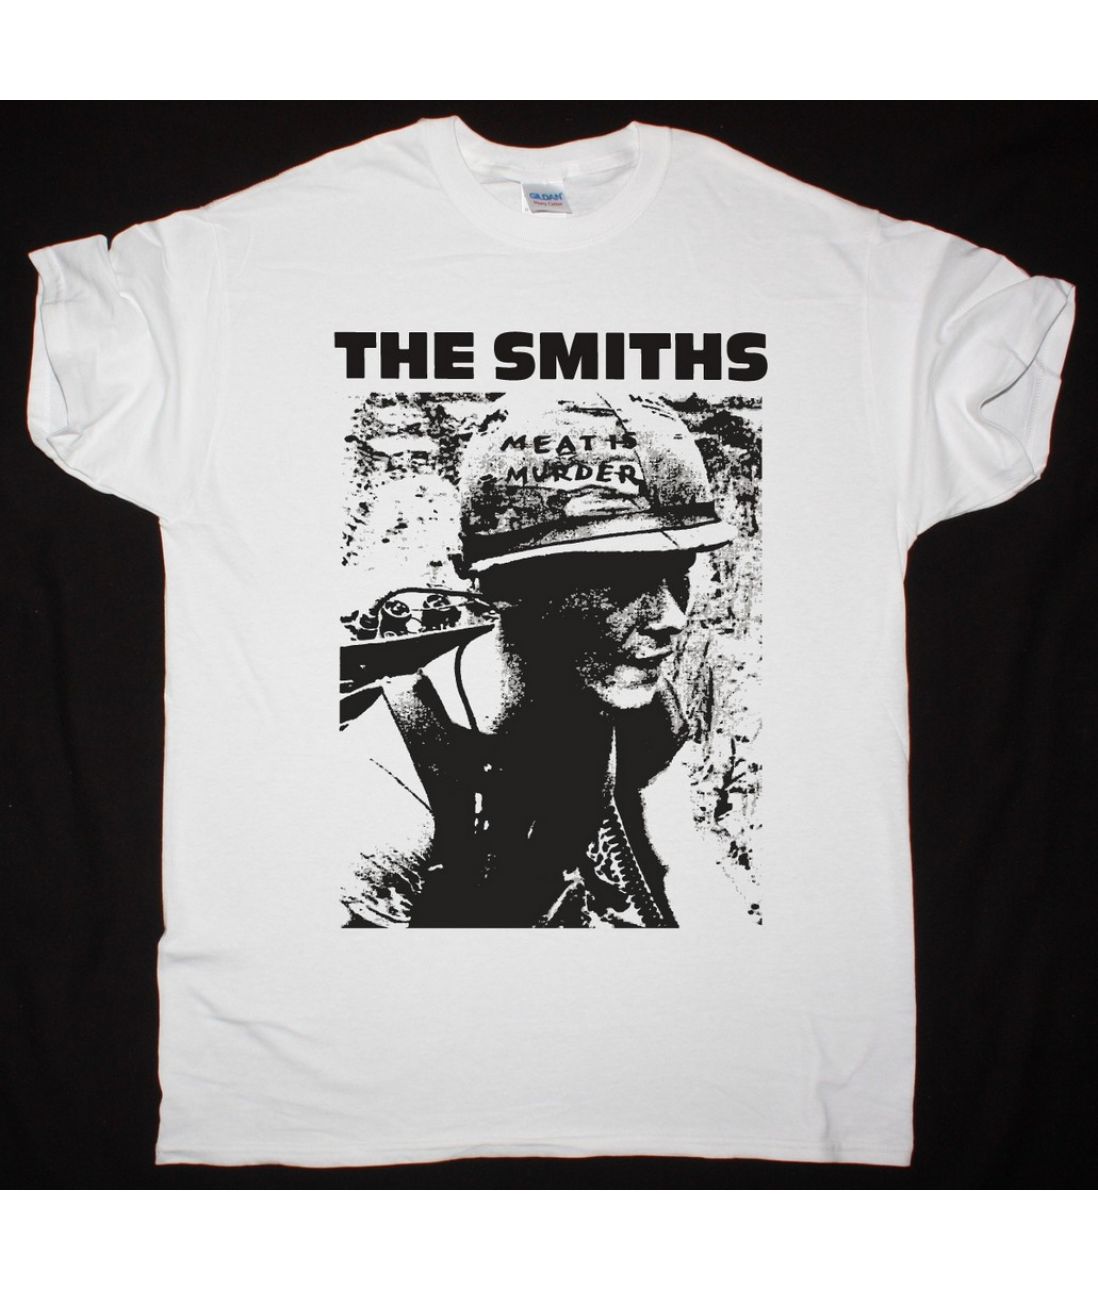 THE SMITHS MEAT IS MURDER NEW WHITE T SHIRT - Best Rock T-shirts